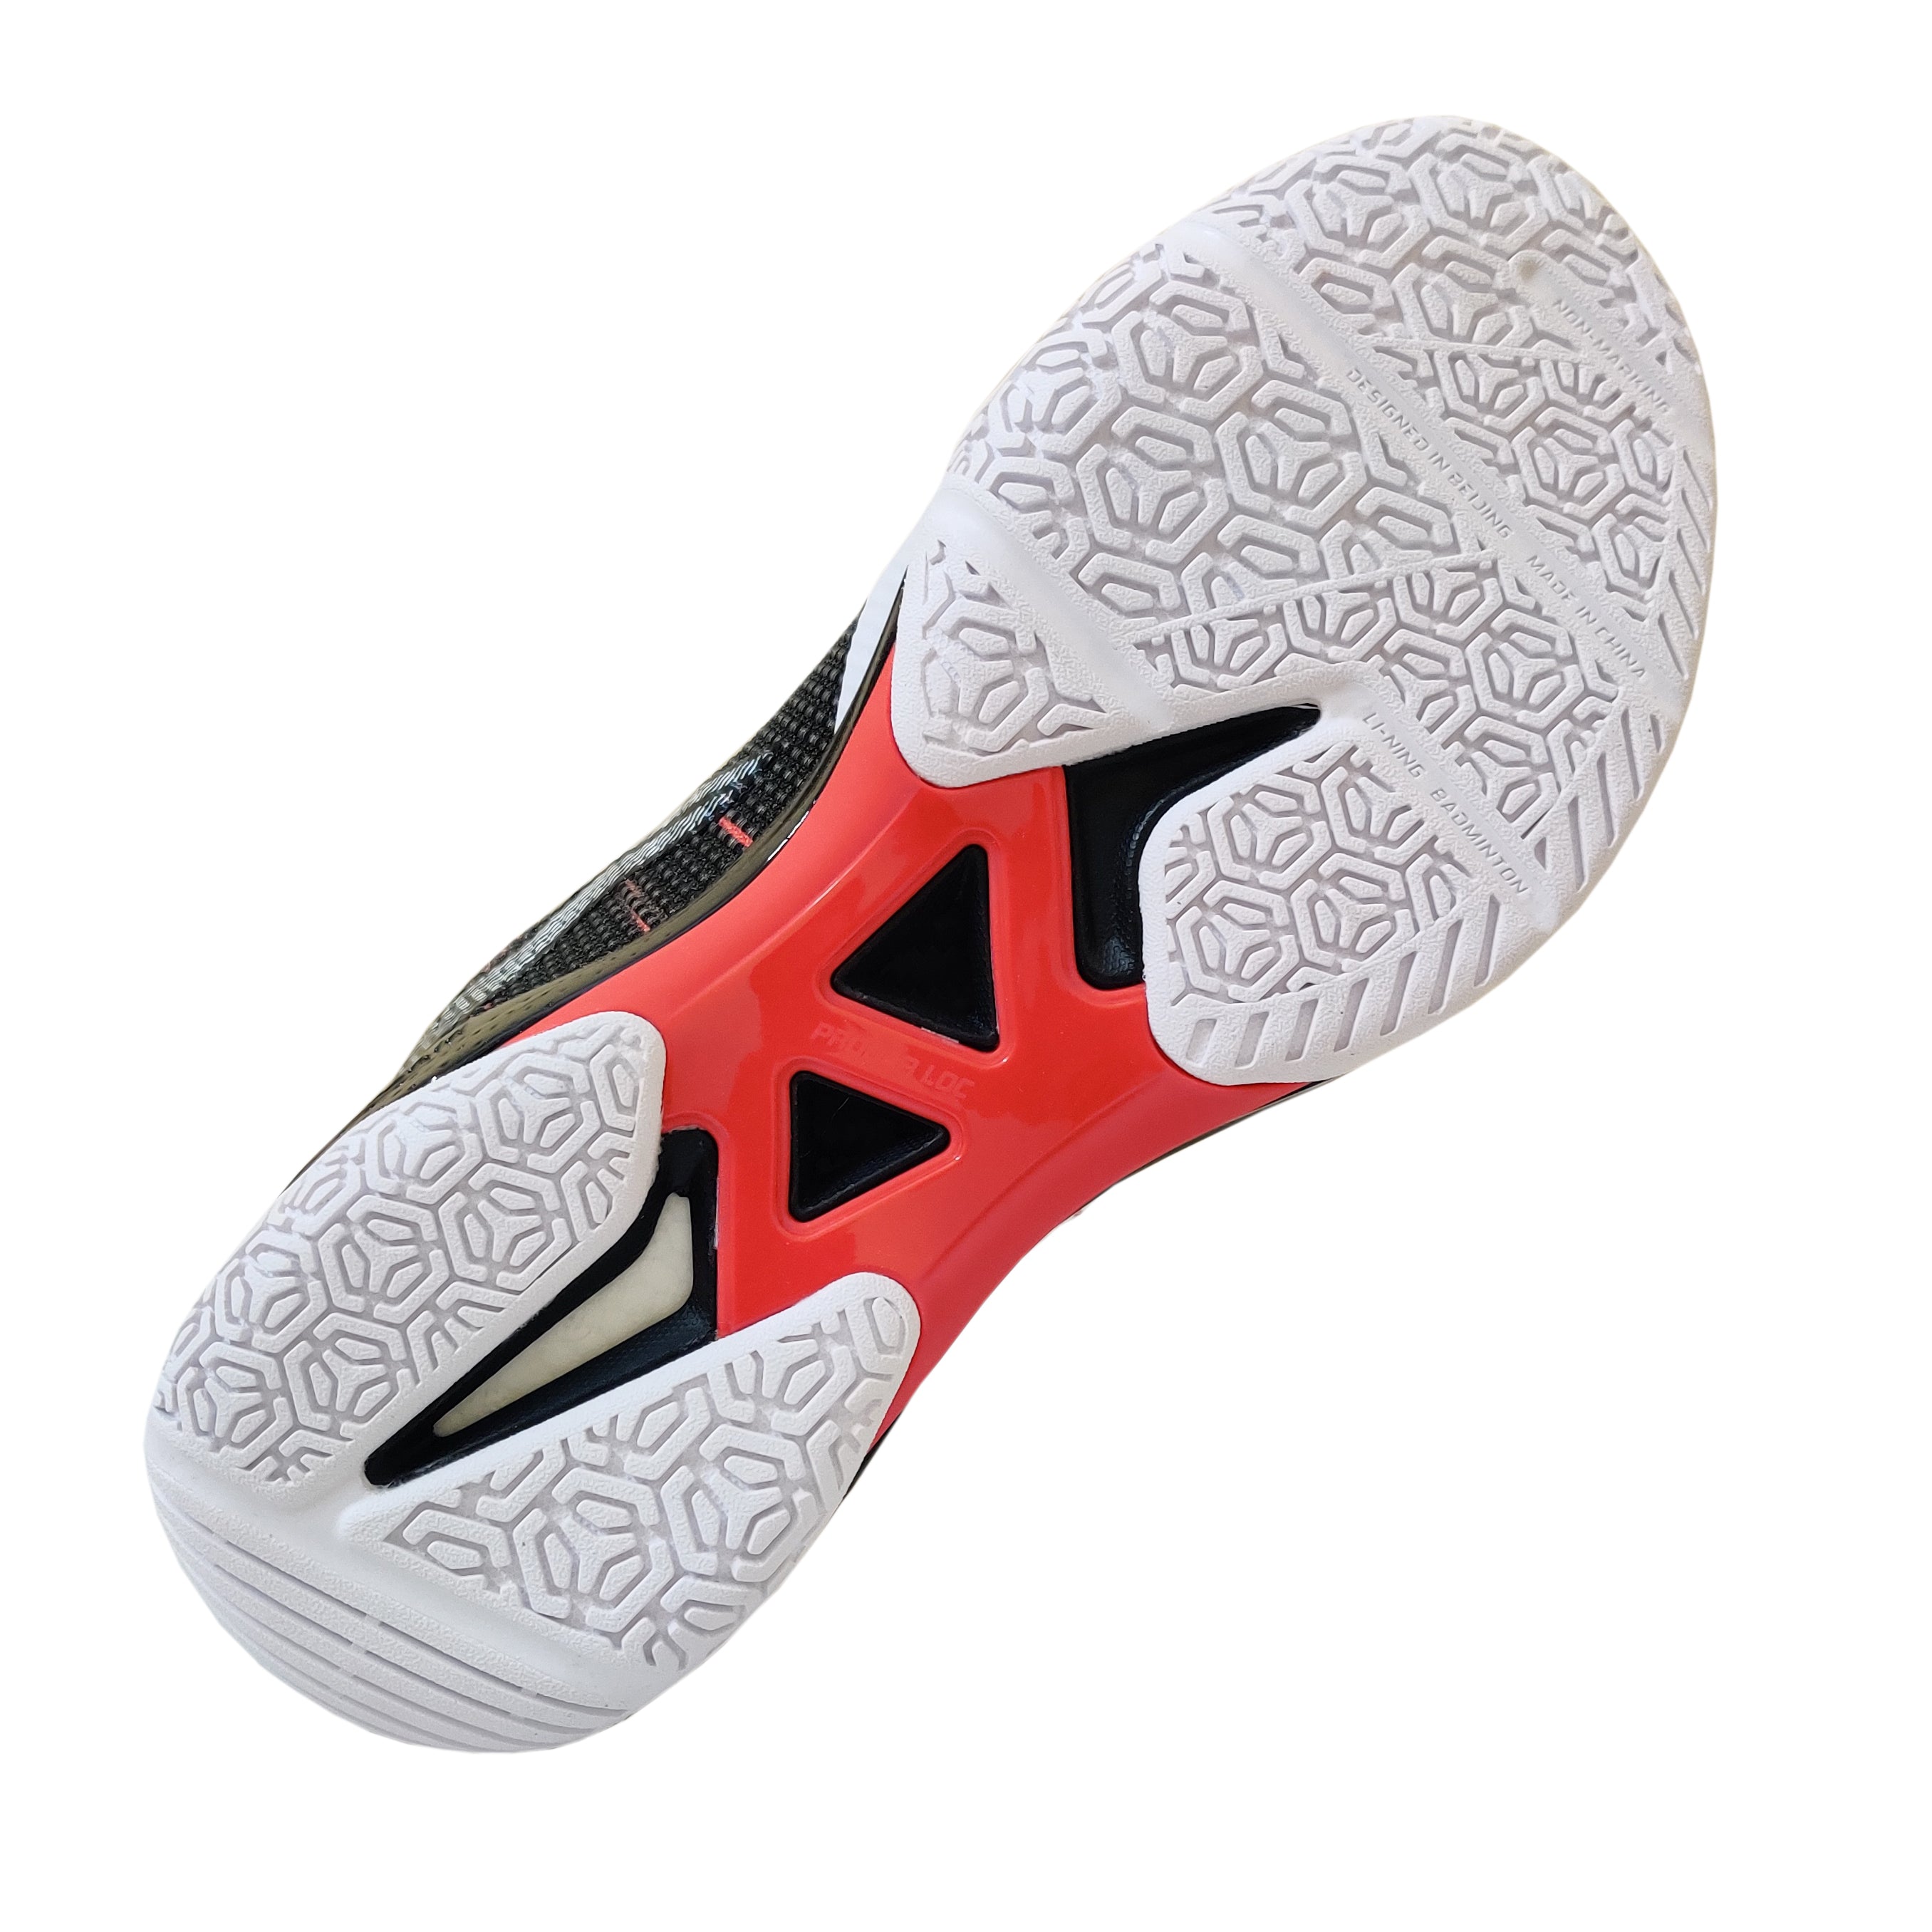 Li-Ning Lei Ting Professional Badminton Competition Shoes